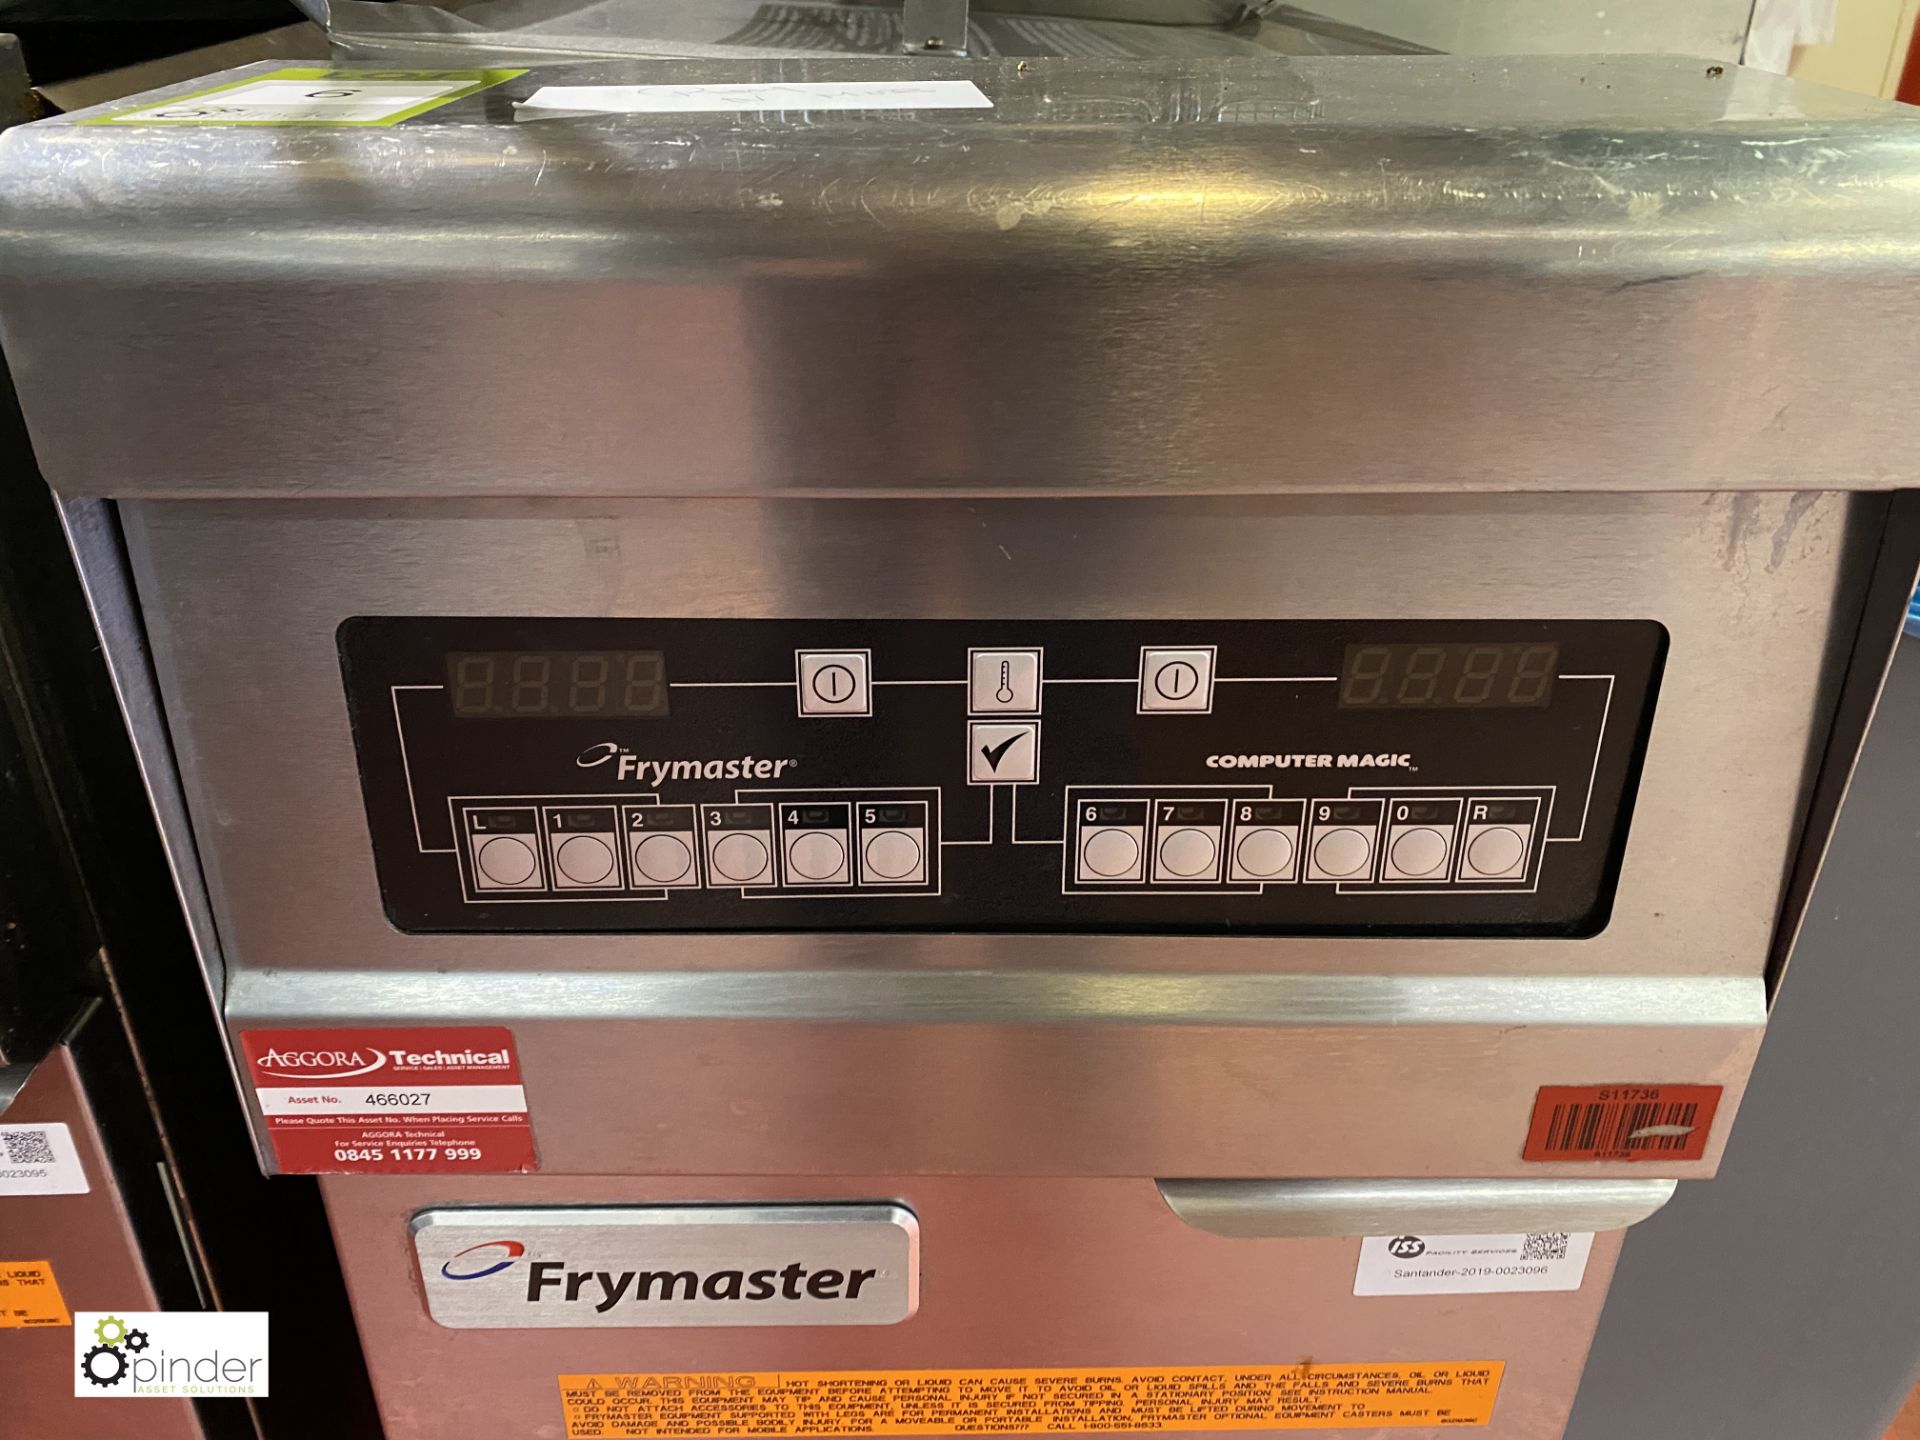 Frymaster PMJ145ECSC stainless steel gas fired twin basket Deep Fat Fryer, 240volts, 400mm x 800mm x - Image 2 of 6